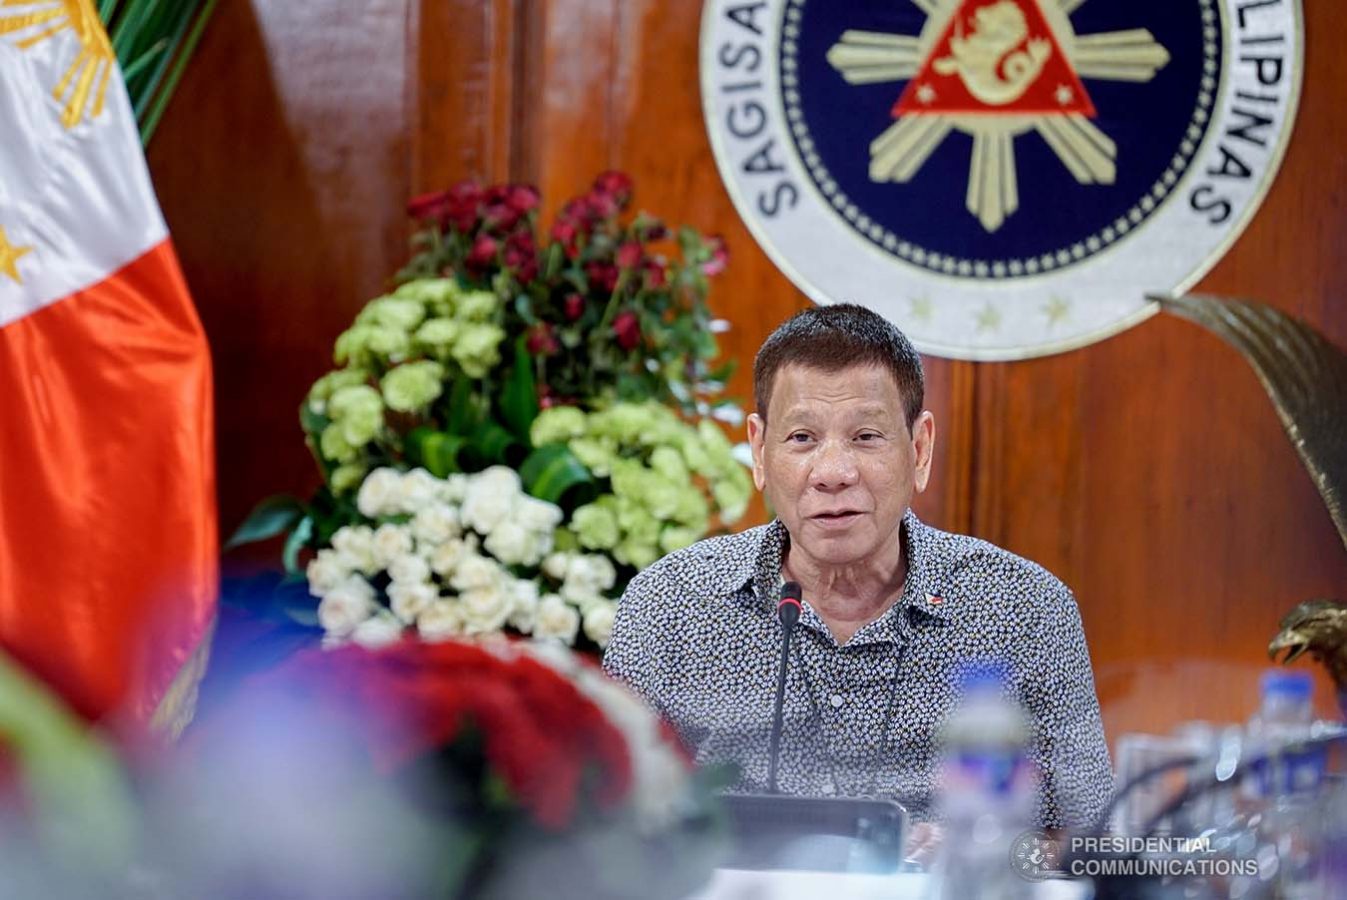 President Rodrigo Roa Duterte talks to the people after holding a meeting with the Inter-Agency Task Force on the Emerging Infectious Diseases (IATF-EID) core members at the Malago Clubhouse in Malacañang on August 31, 2020. KING RODRIGUEZ/PRESIDENTIAL PHOTO